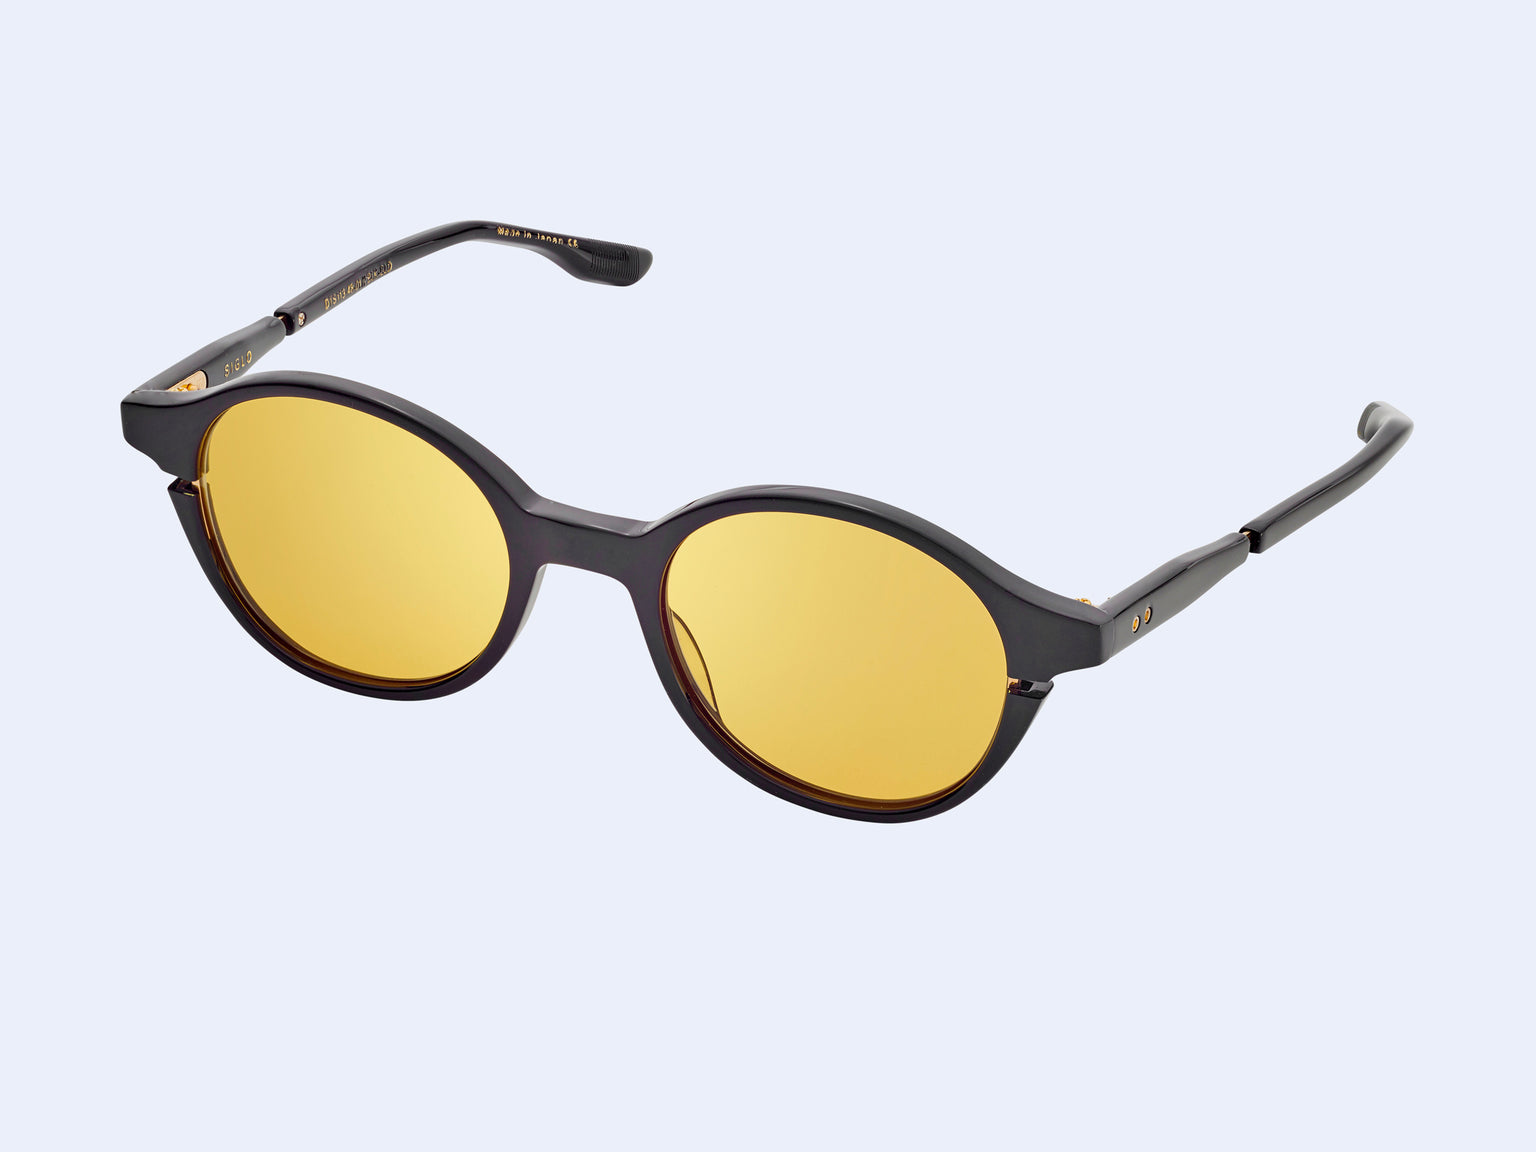 DITA Siglo (Black/White Gold with Amber Lens)